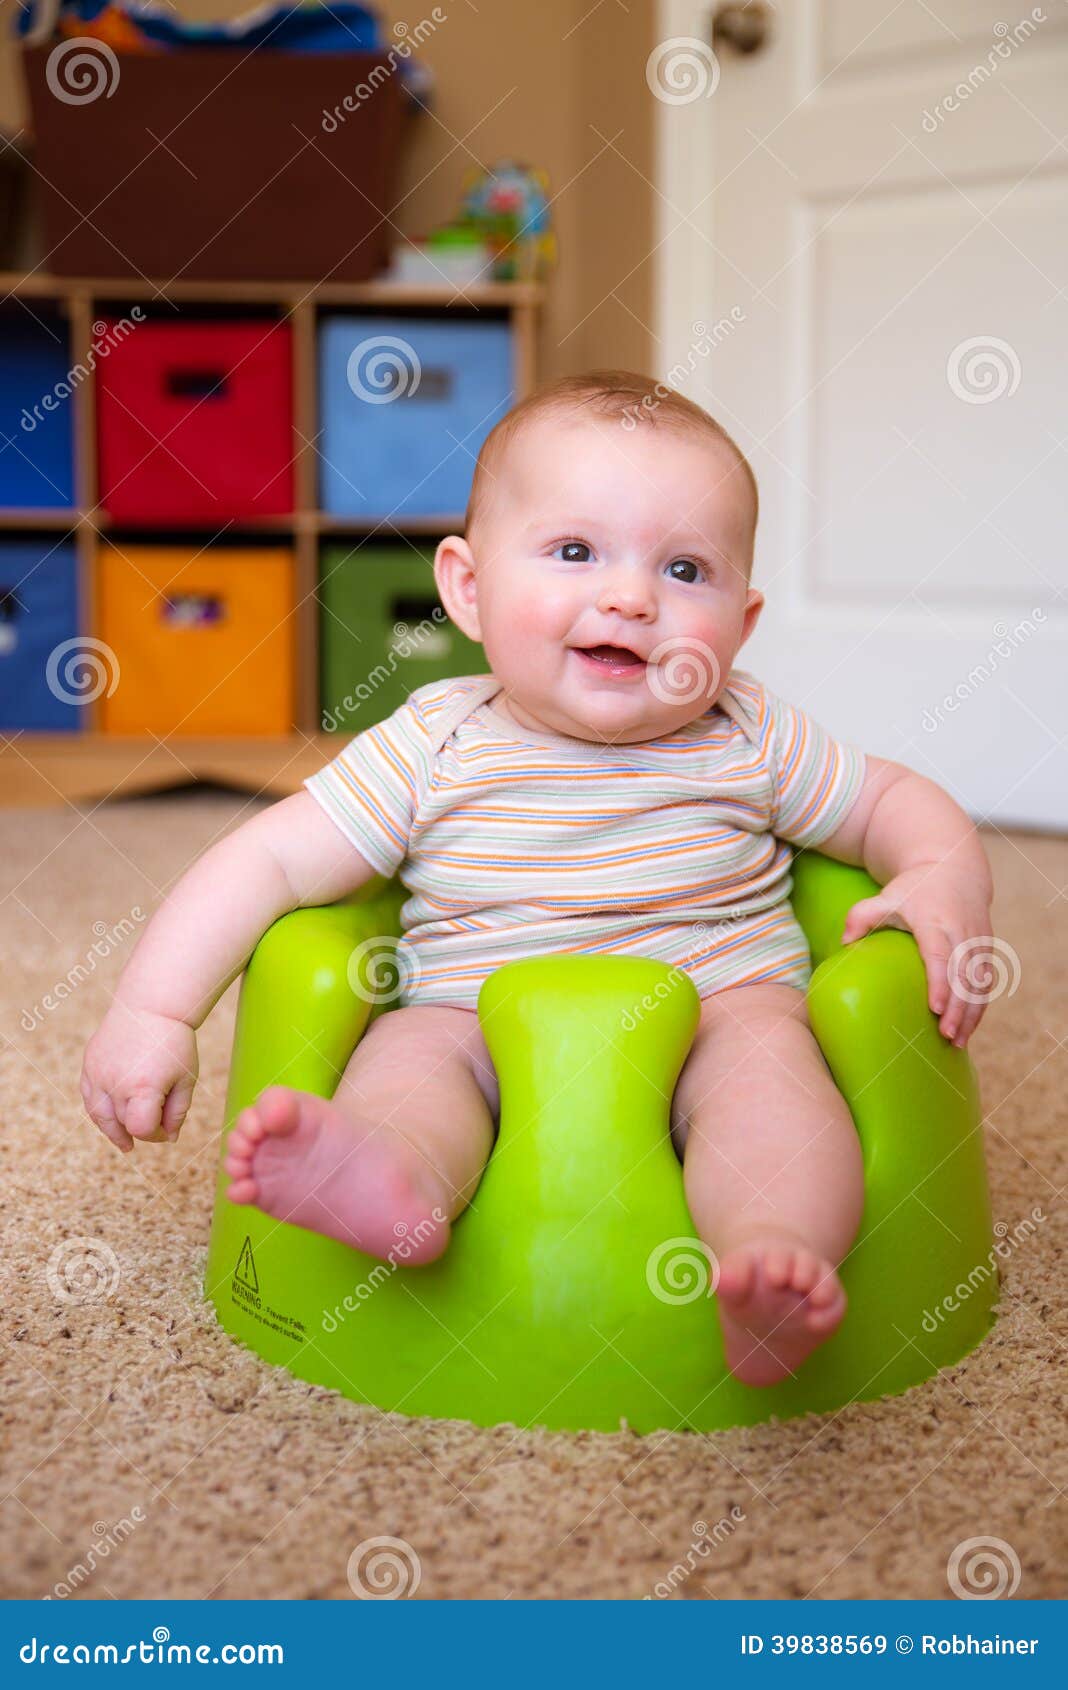 chair to help infant sit up